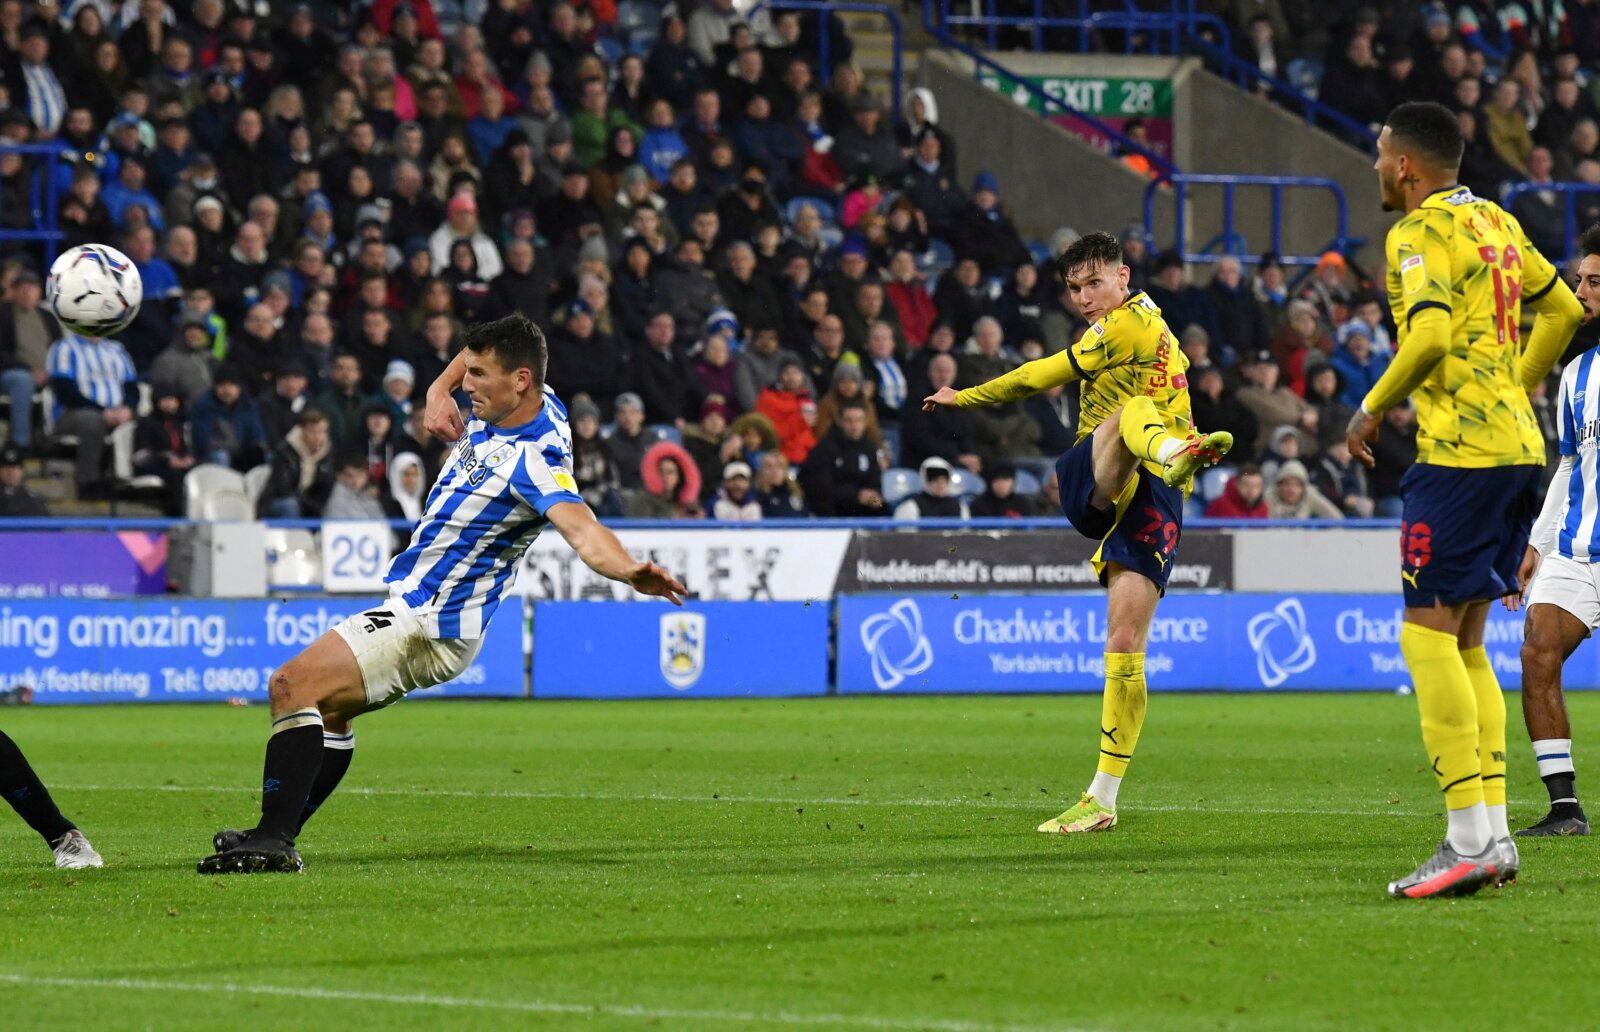 Soccer Football - Championship - Huddersfield Town v West Bromwich Albion - John Smith's Stadium, Huddersfield, Britain - November 20, 2021 West Bromwich Albion's Taylor Gardner-Hickman shoots at goal        Paul Burrows/Action Images